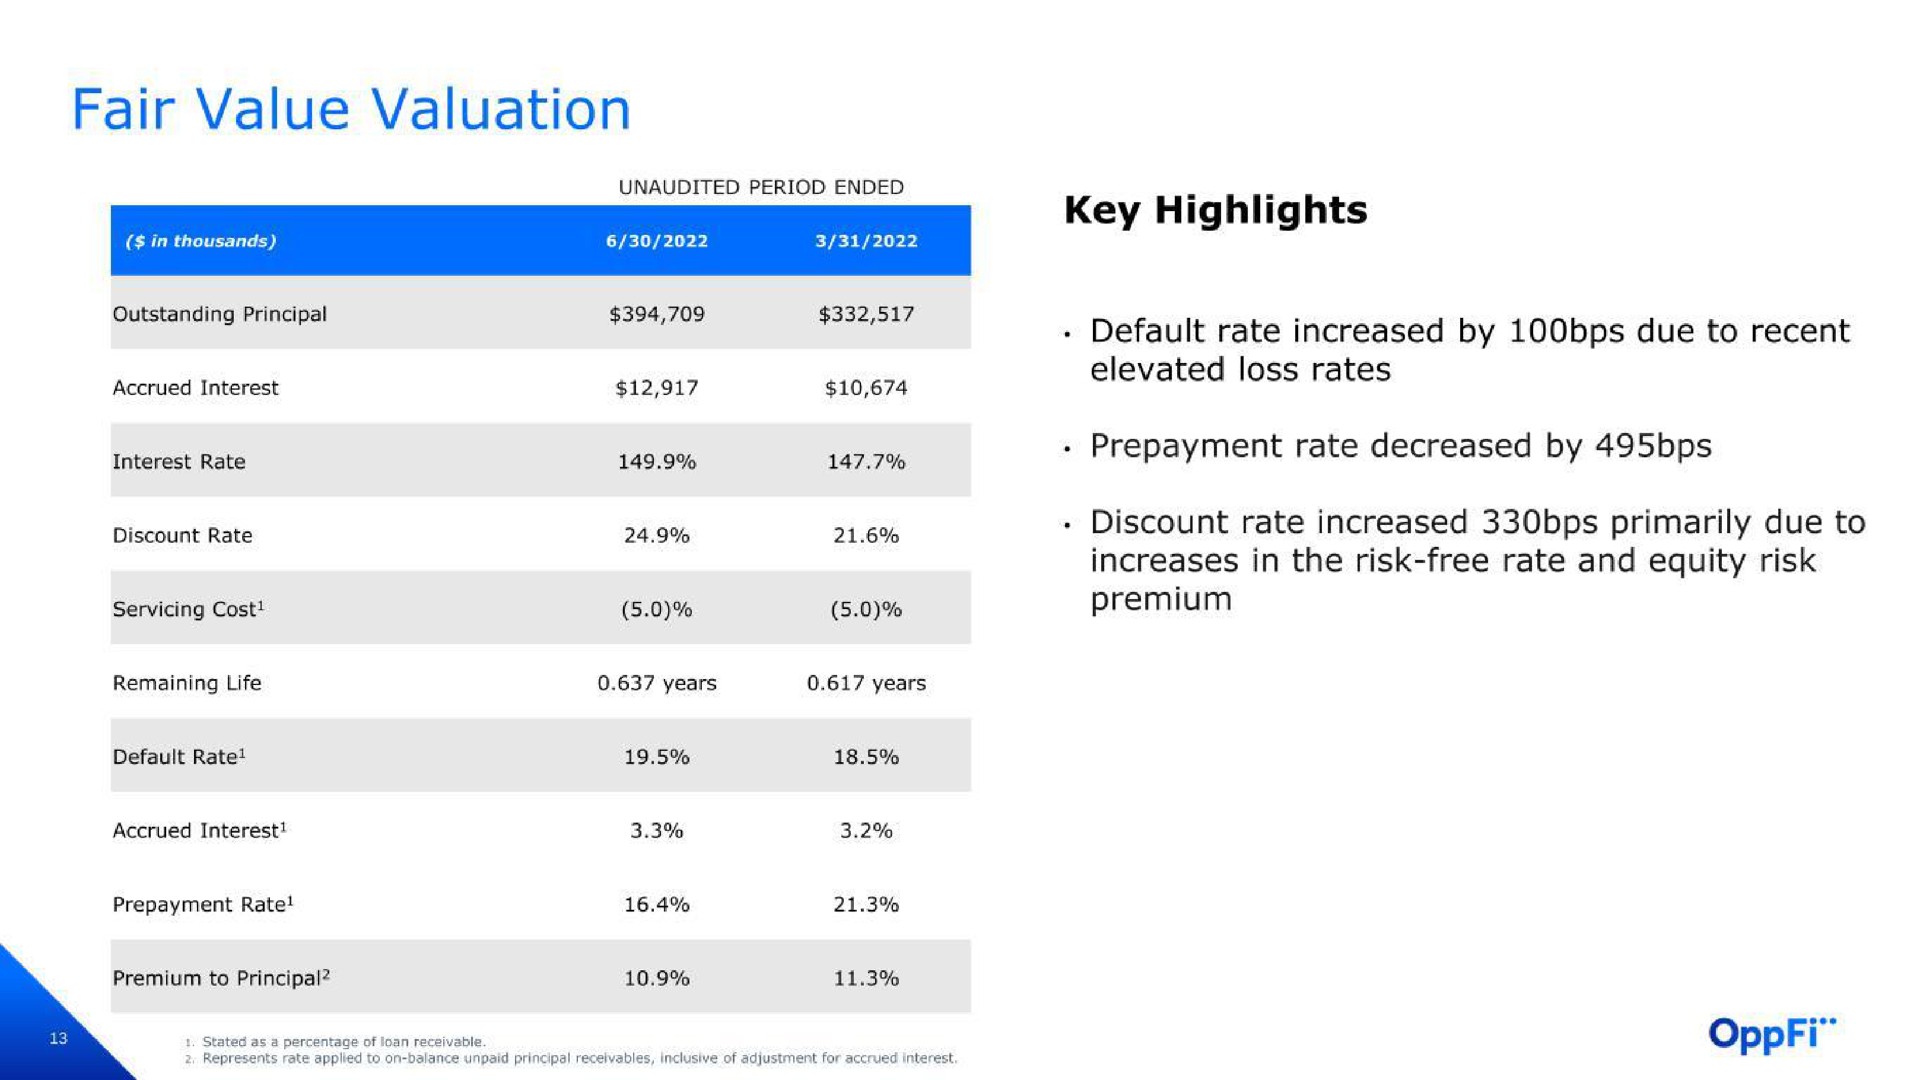 fair value valuation key highlights default rate increased by due to recent vee elevated loss rates prepayment rate decreased by discount rate increased primarily due to | OppFi